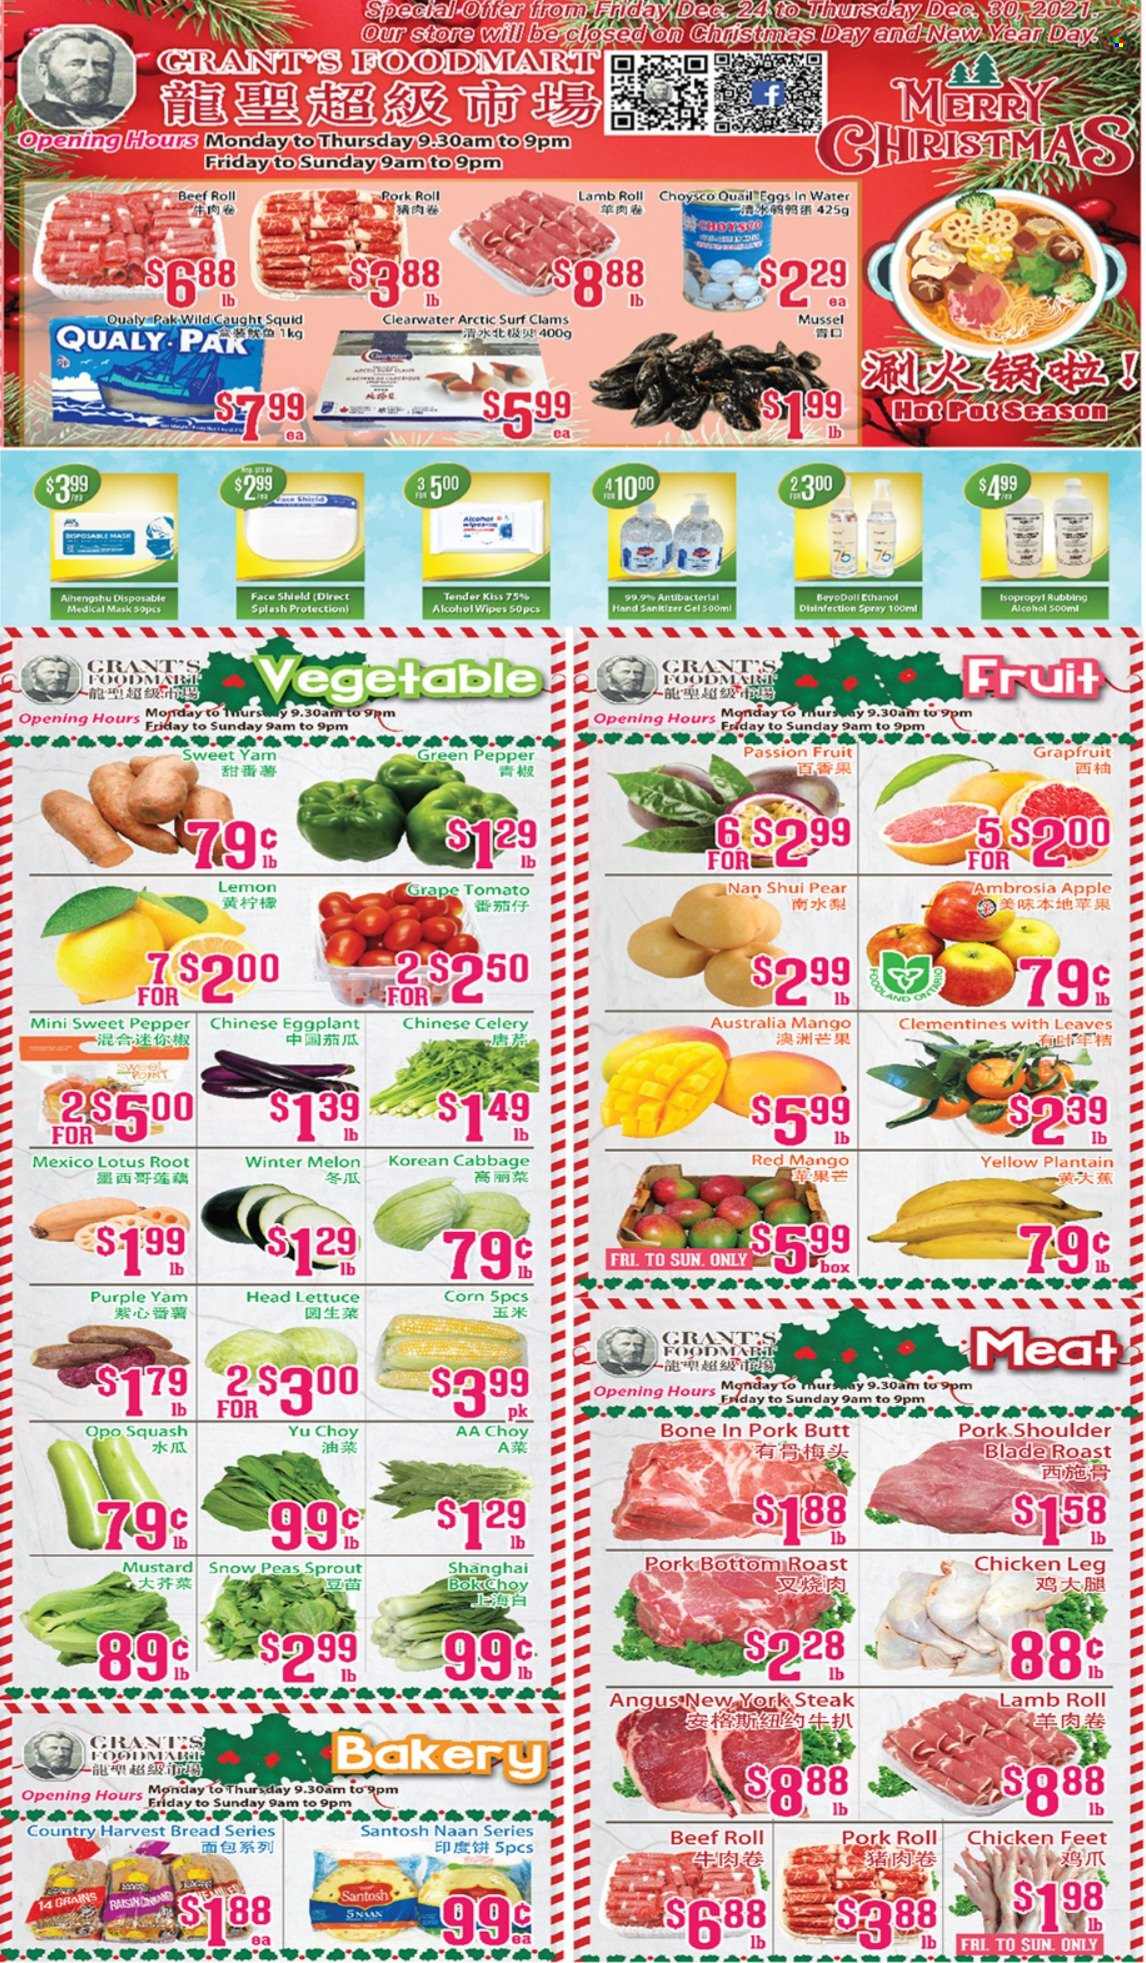 thumbnail - Grant's Foodmart Flyer - December 24, 2021 - December 30, 2021 - Sales products - bread, cabbage, celery, corn, peas, lettuce, eggplant, green pepper, clementines, mango, pears, melons, clams, mussels, squid, eggs, snow peas, Country Harvest, mustard, Grant's, quail, chicken legs, chicken paws, chicken, pork meat, pork shoulder, wipes, Surf, Lotus, hand sanitizer, steak. Page 1.